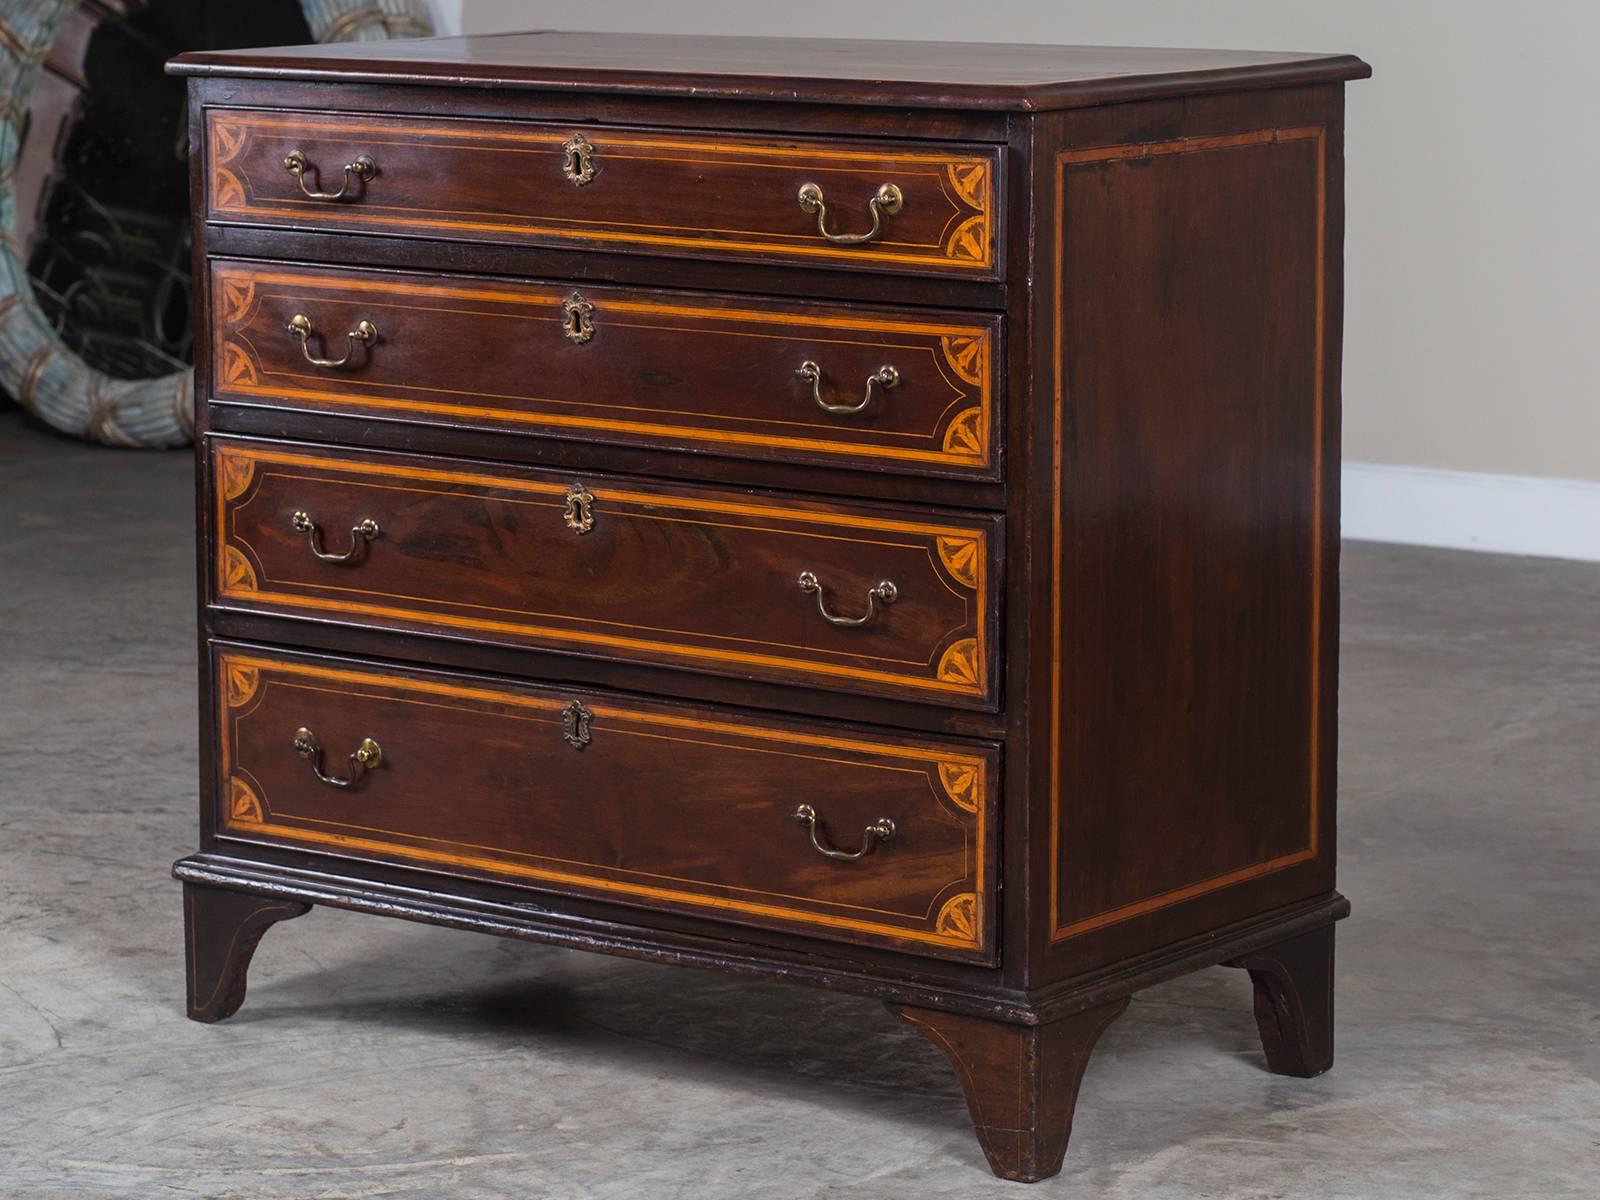 Receive our new selections direct from 1stdibs by email each week. Please click Follow Dealer below and see them first!

The visual contrast between the timbers on this antique English neoclassical mahogany chest of drawers circa 1860 is